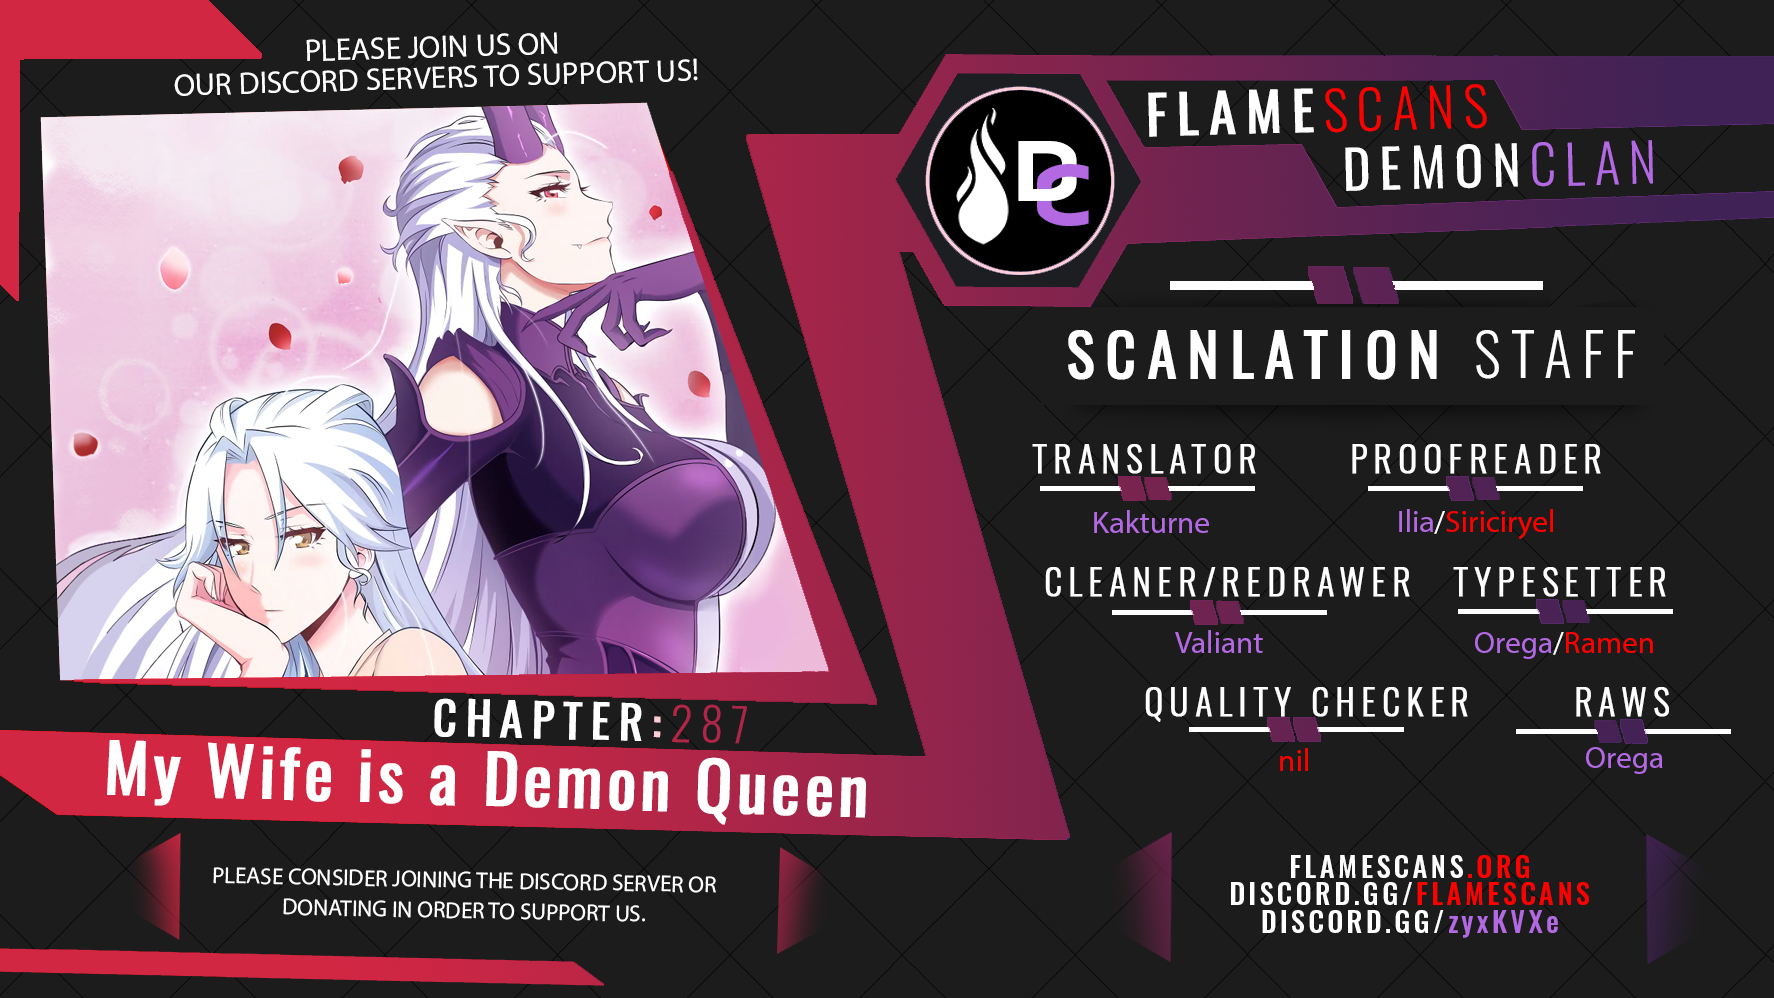 My Wife is a Demon Queen - Chapter 9360 - Image 1